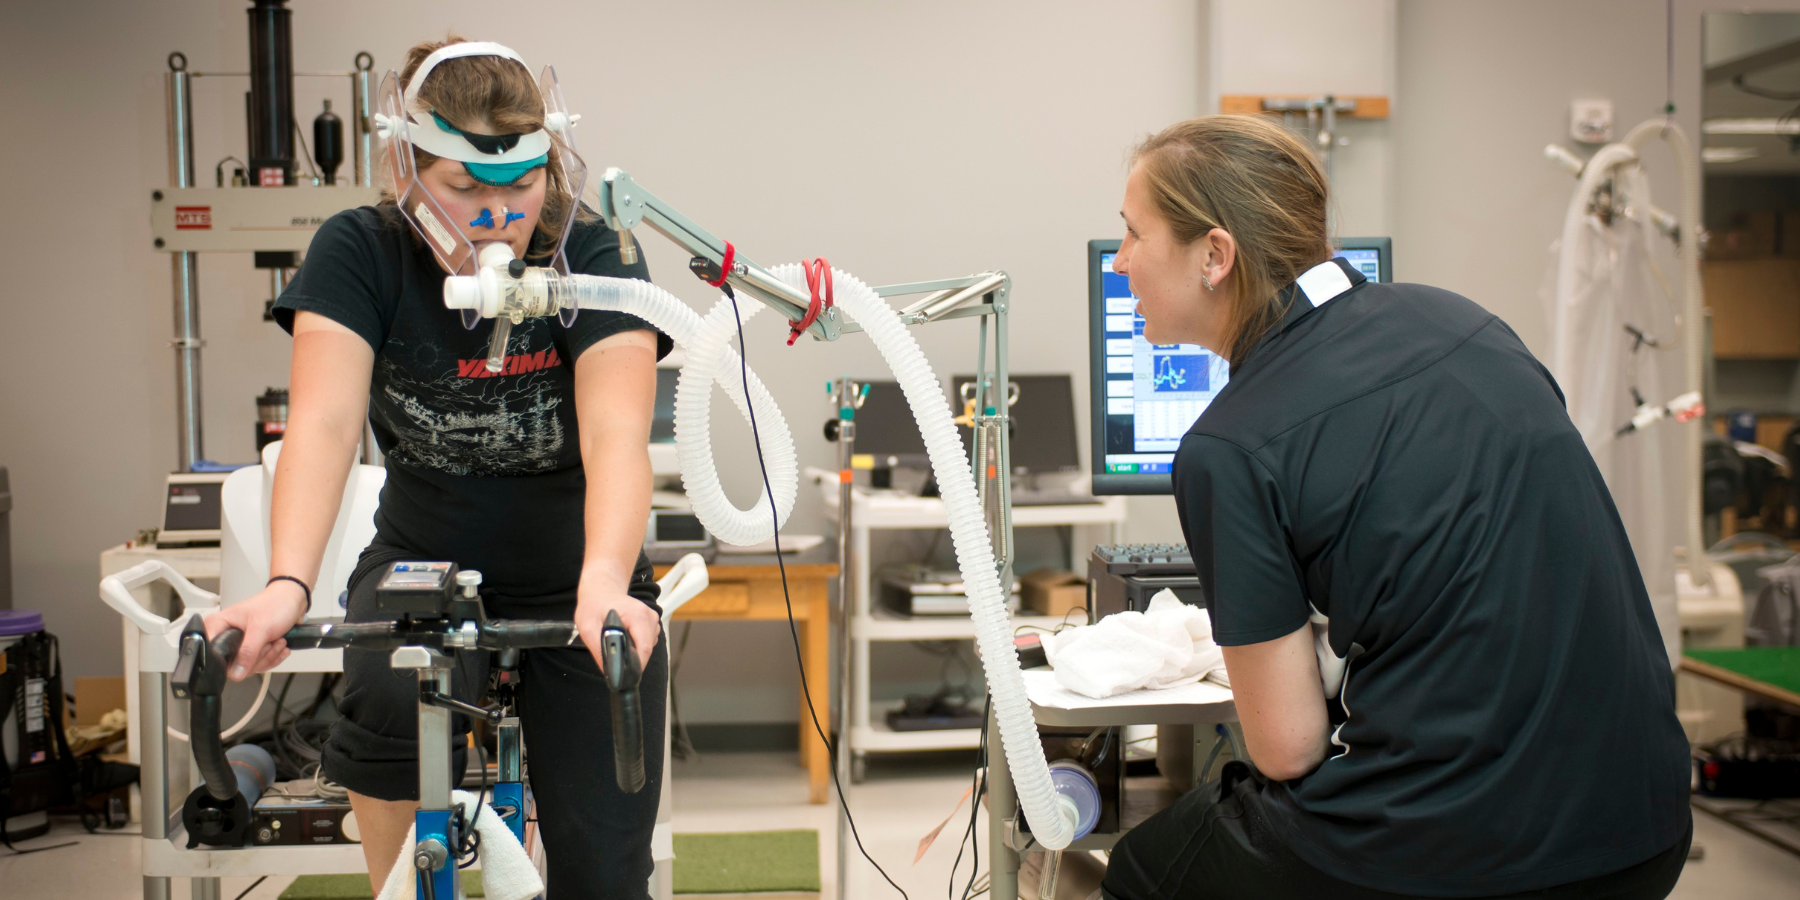 Photo of two students working in a lab, measuring health stats while someone is riding a stationary bike.